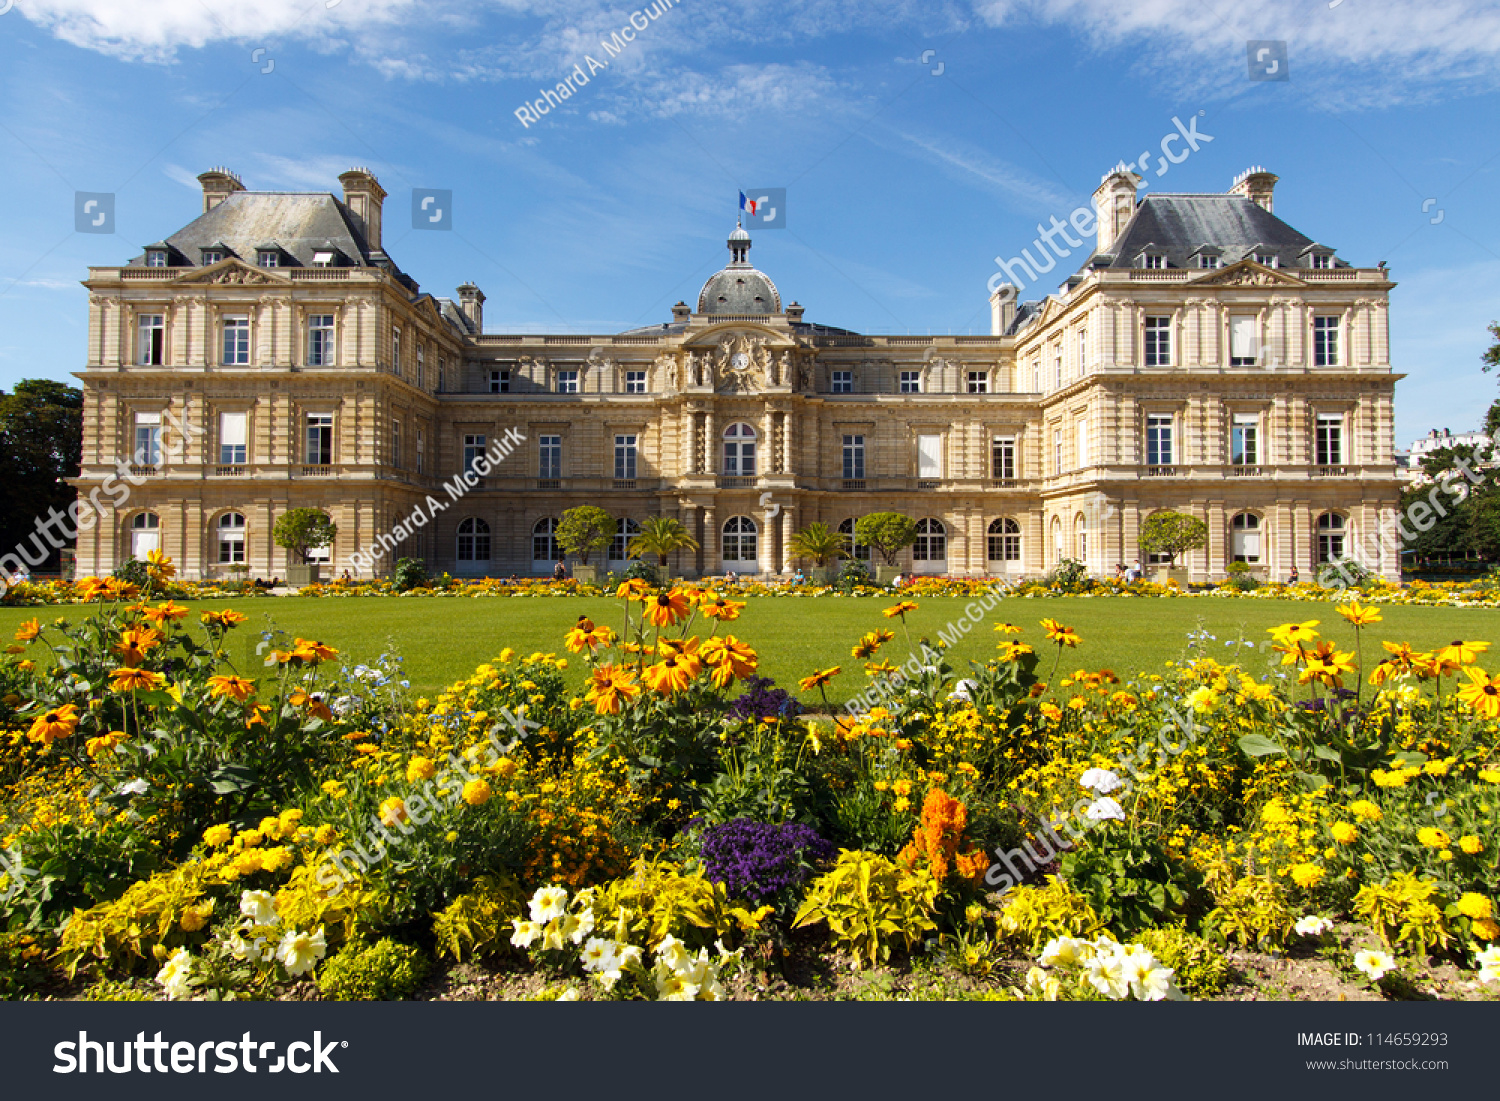 Color DSLR landscape picture of the Palace in Luxembourg Gardens, Paris, France; with colorful flowers and copy space for text.  Popular with tourists and Parisians, though no people are seen. #114659293